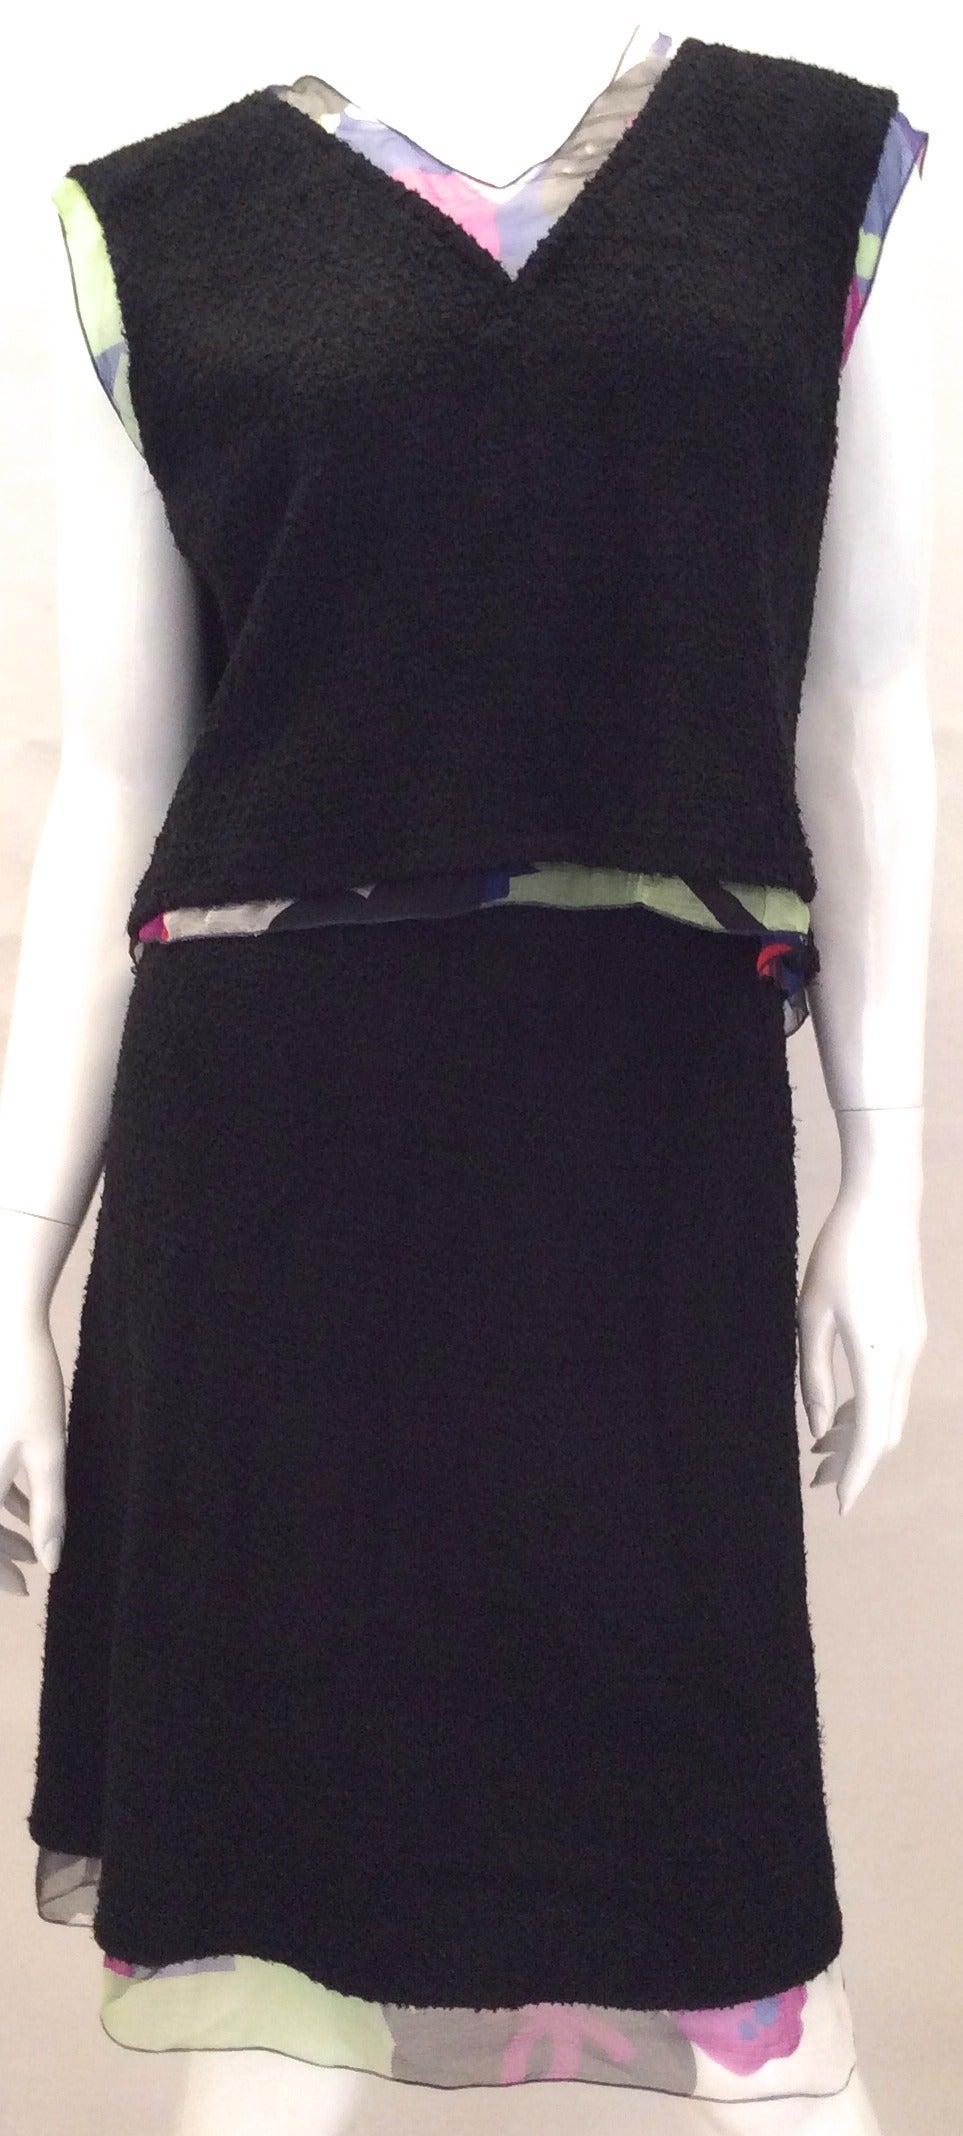 MAGNIFICENT Chanel 3 Piece Black Boucle with Silk Suit In Excellent Condition For Sale In Boca Raton, FL